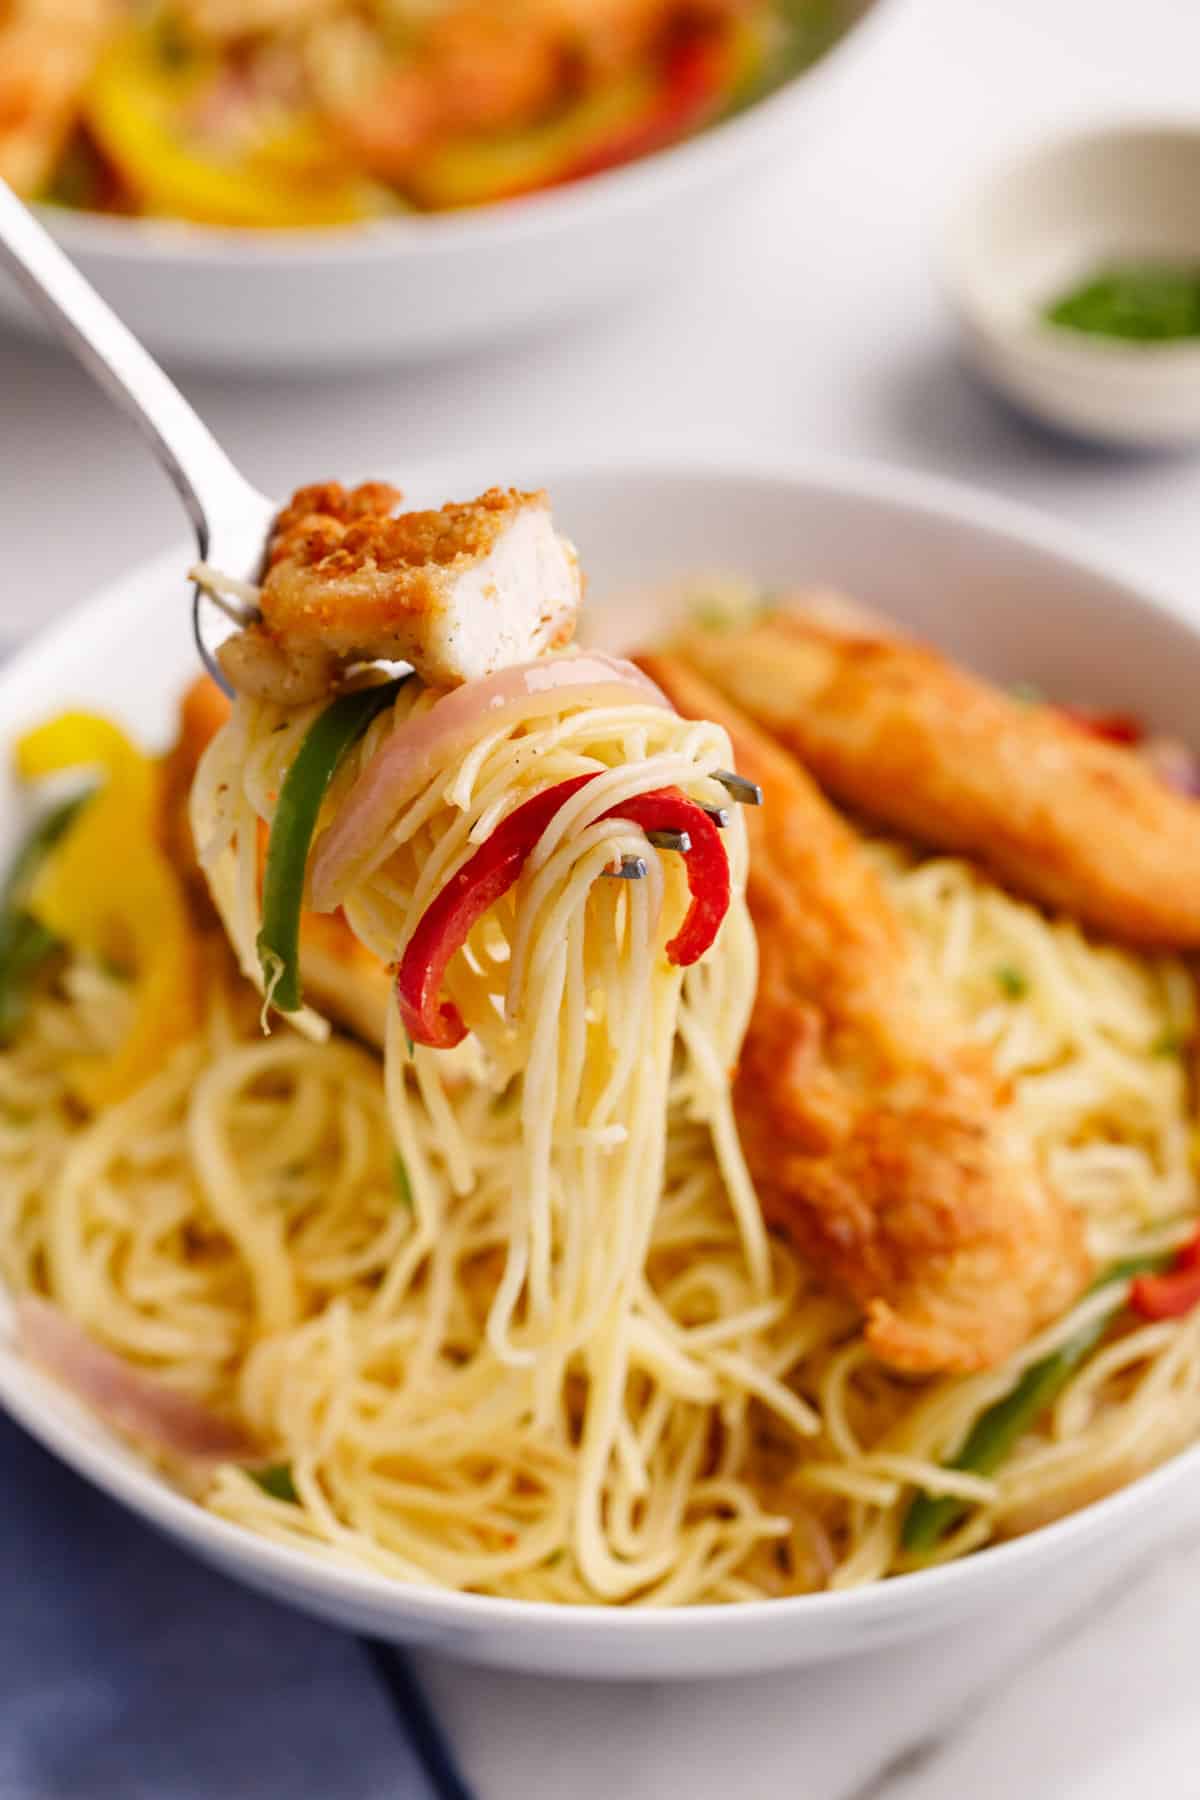 close up image of a forkful of olive garden chicken scampi.